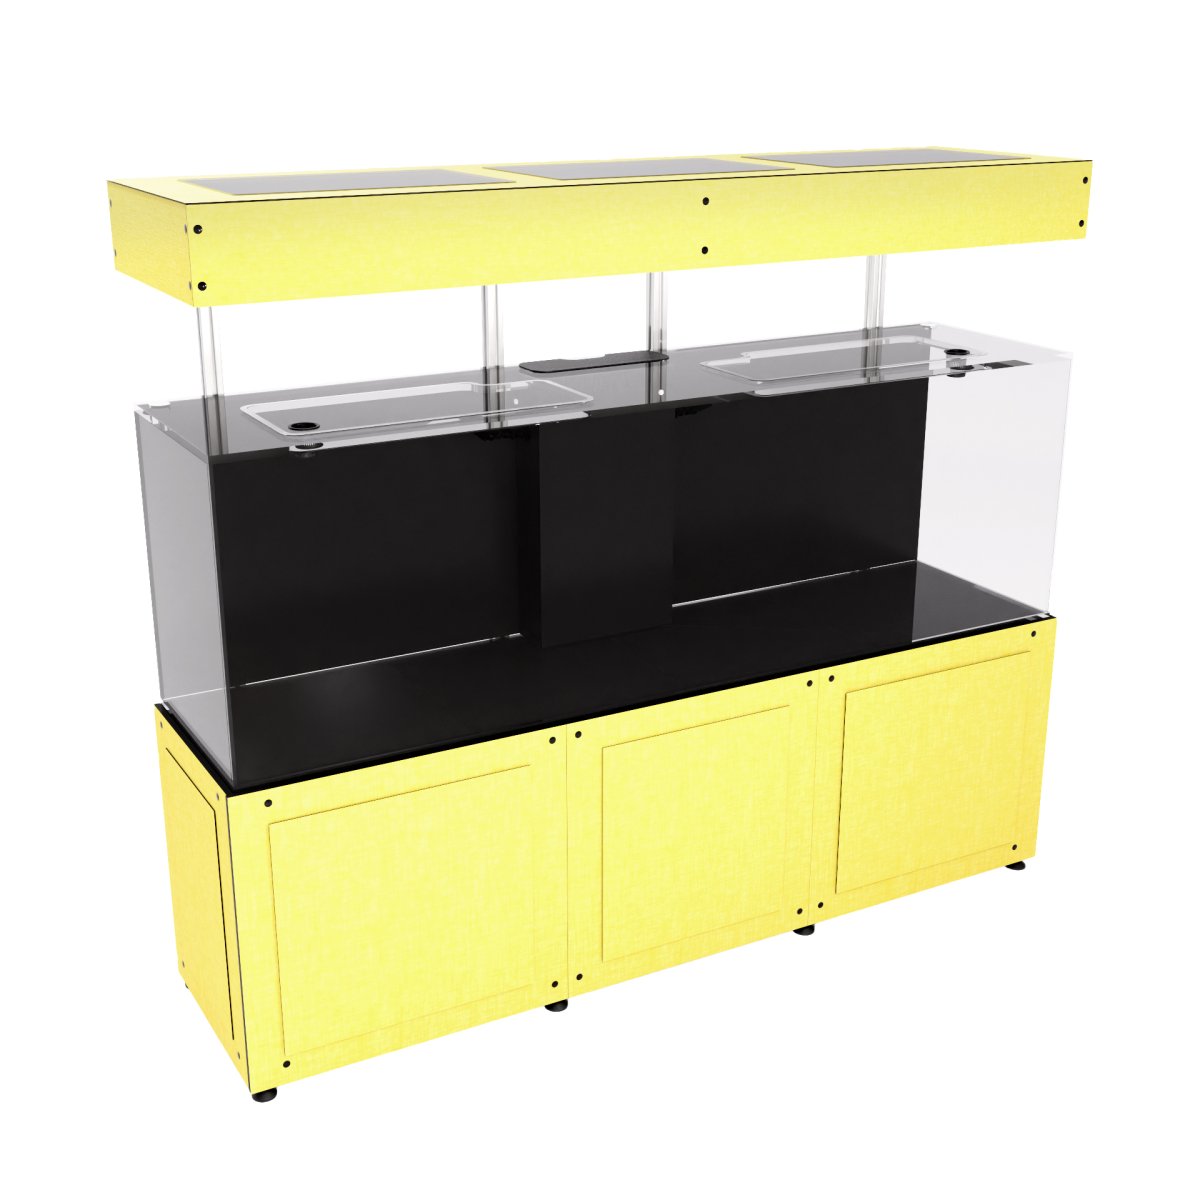 96x24x30 Cabinet Stand w Canopy - hanging doors - Sunny Side Up.jpg